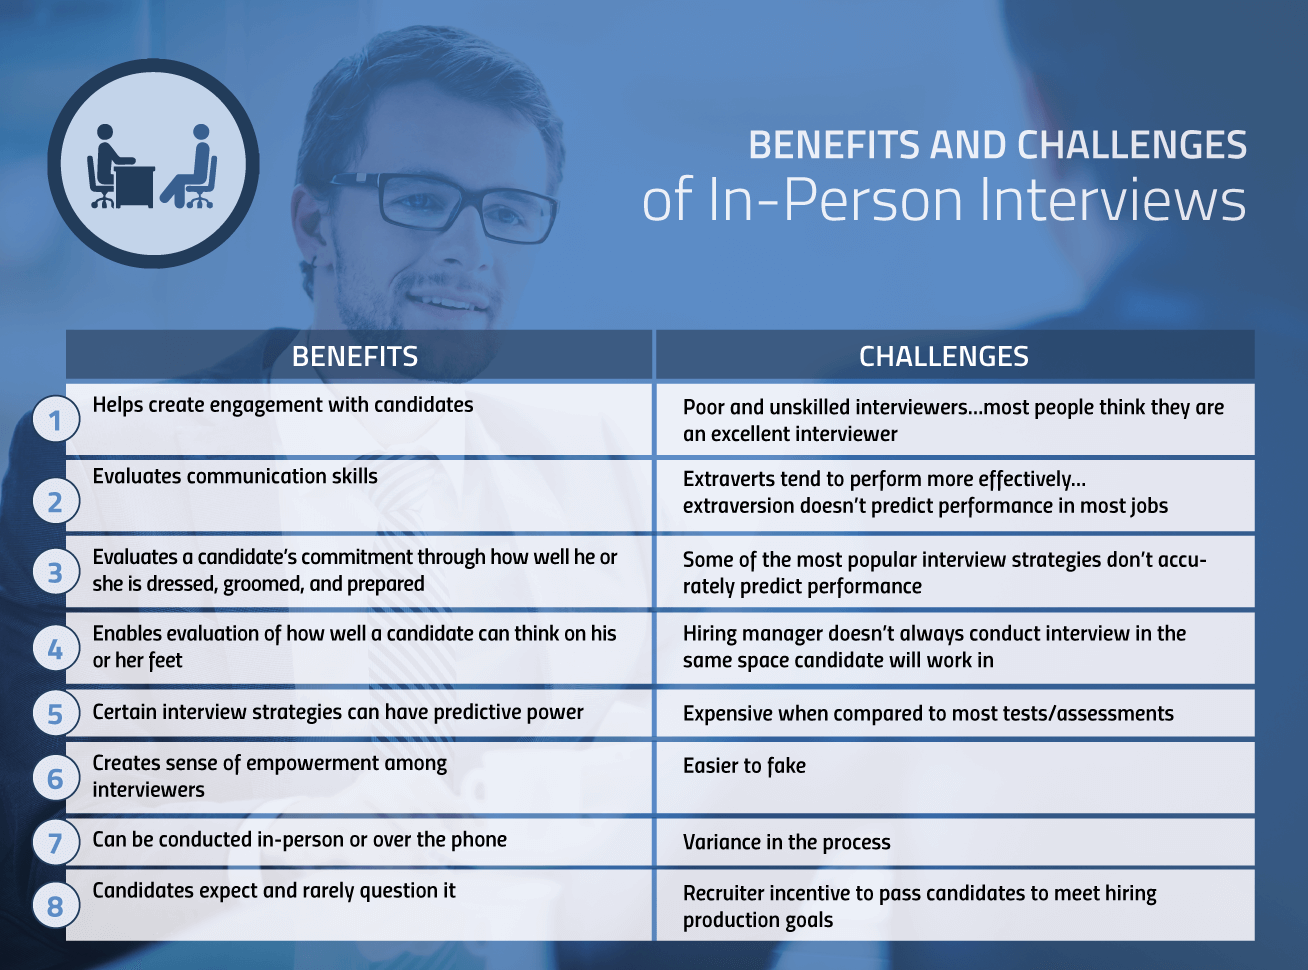 Benefits and Challenges of In-Person Interviews